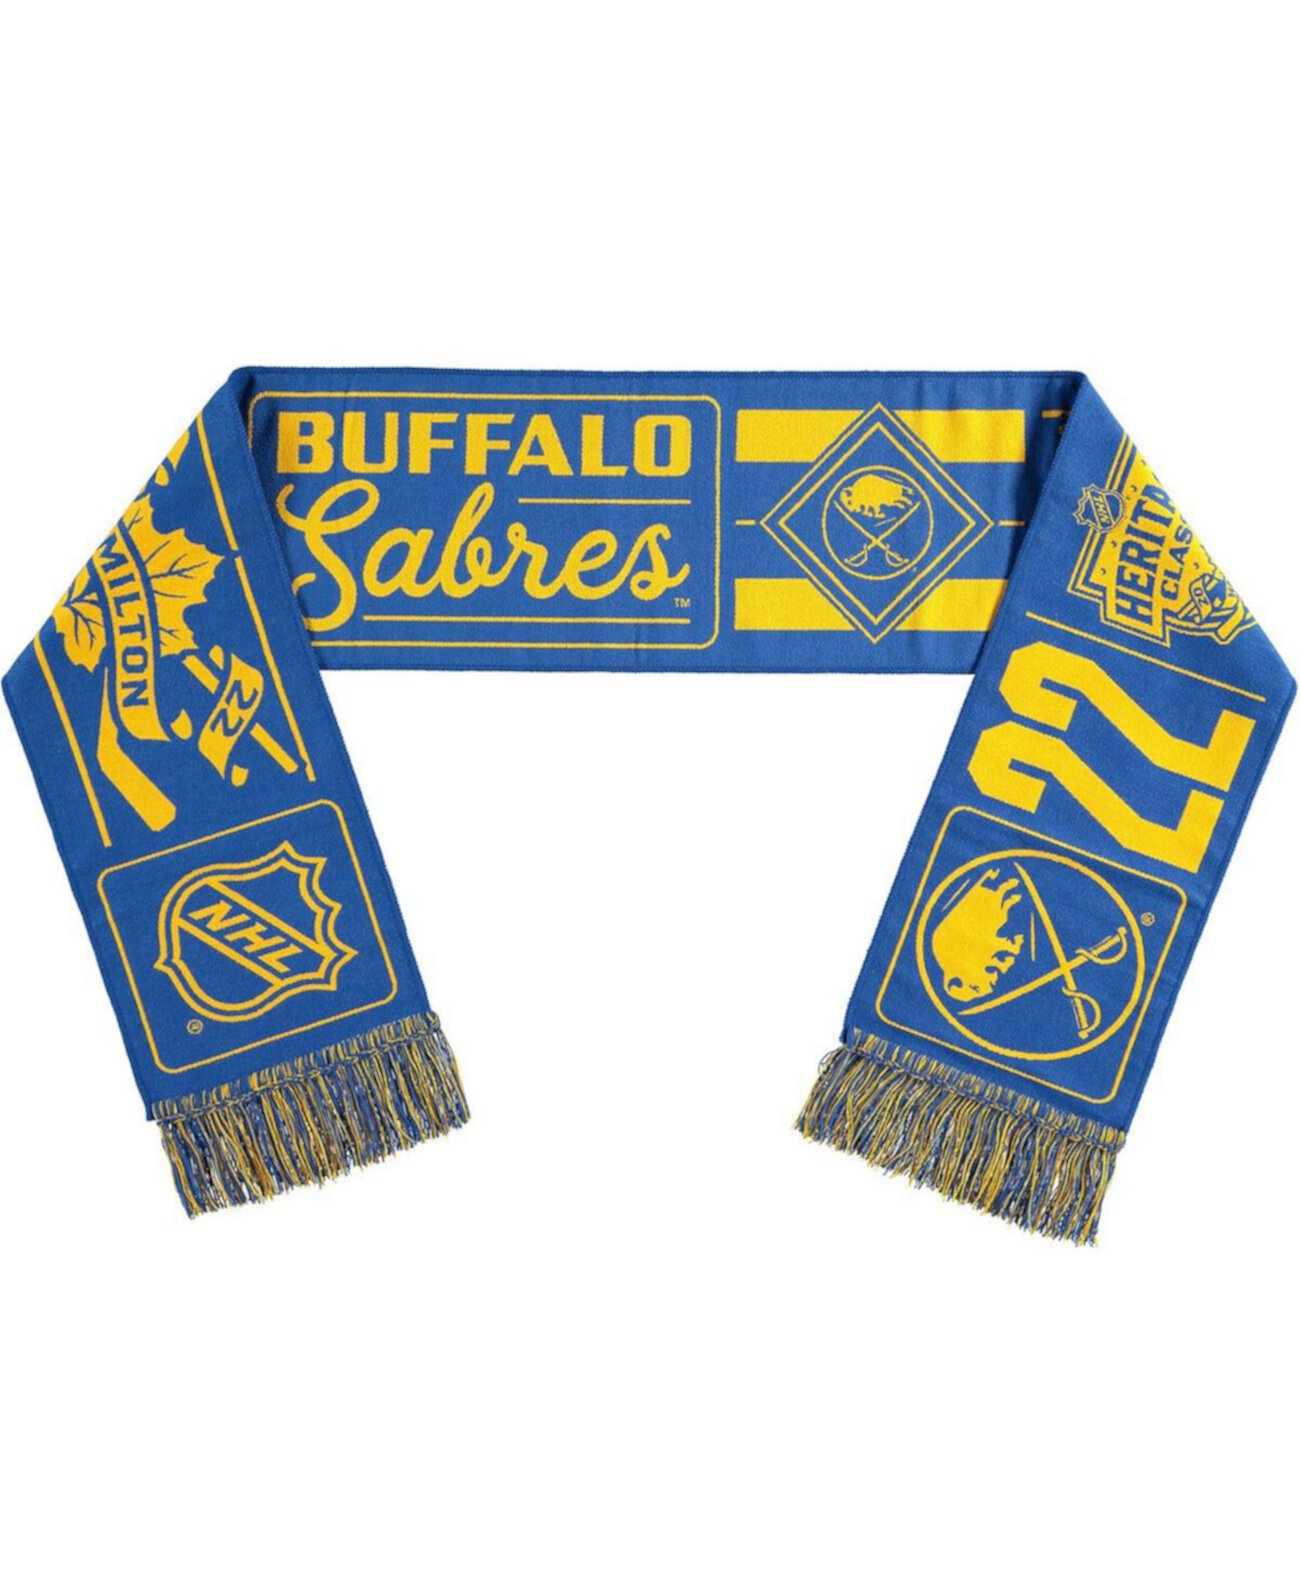 Men's and Women's Royal Buffalo Sabres Event Scarf Ruffneck Scarves